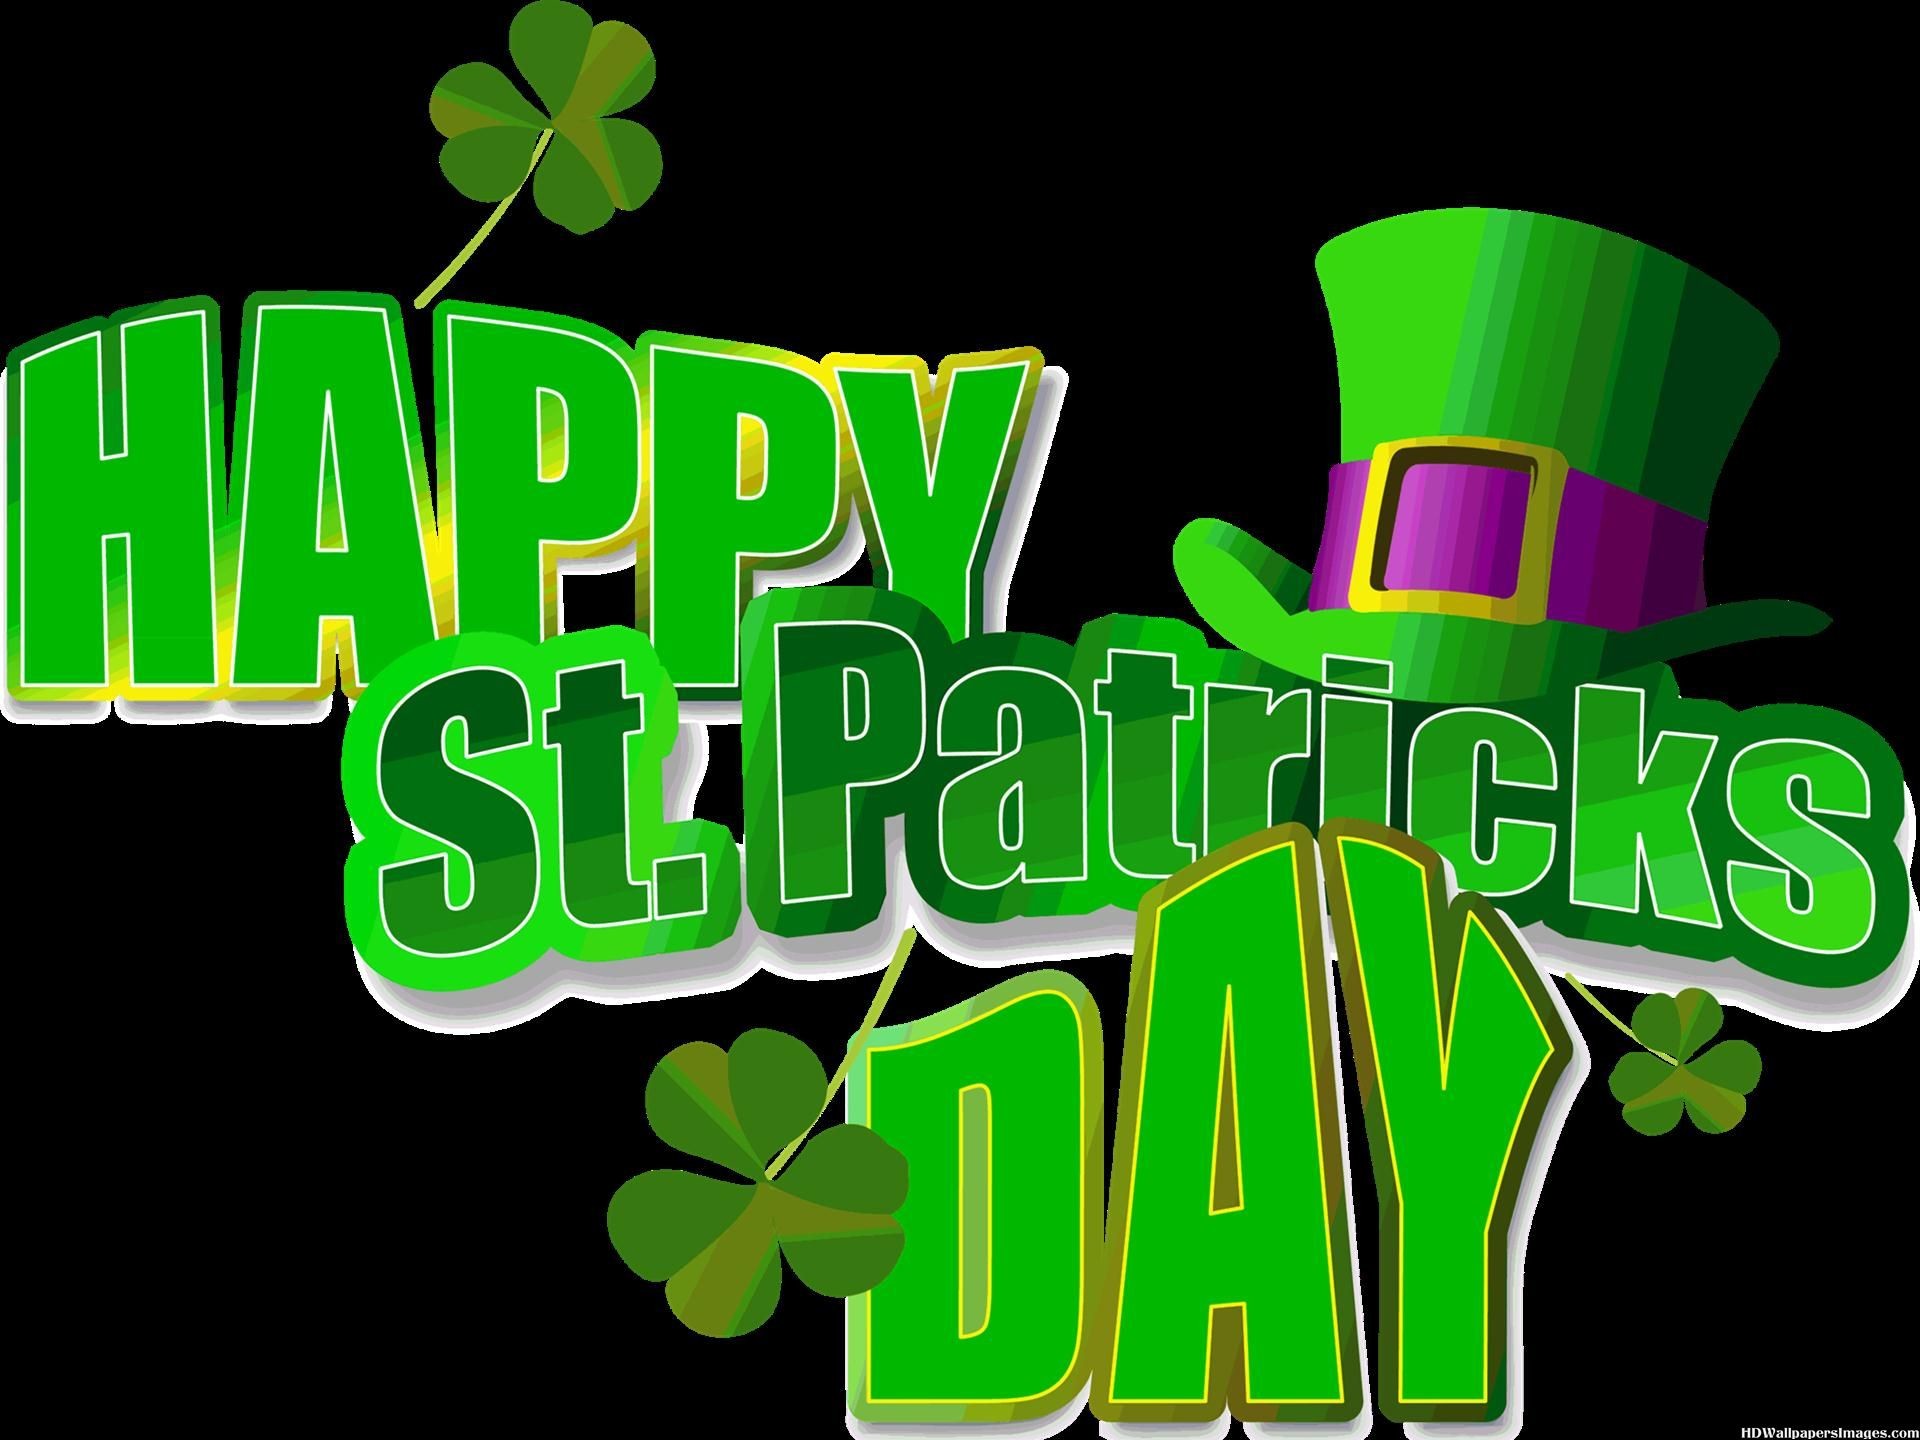 1920x1440 Happy Saint Patrick's Day Wallpapers and Pictures Enjoy new and latest  pictures of Happy Saint Patrick's Day Wallpapers. We will try to bring the  best for ...